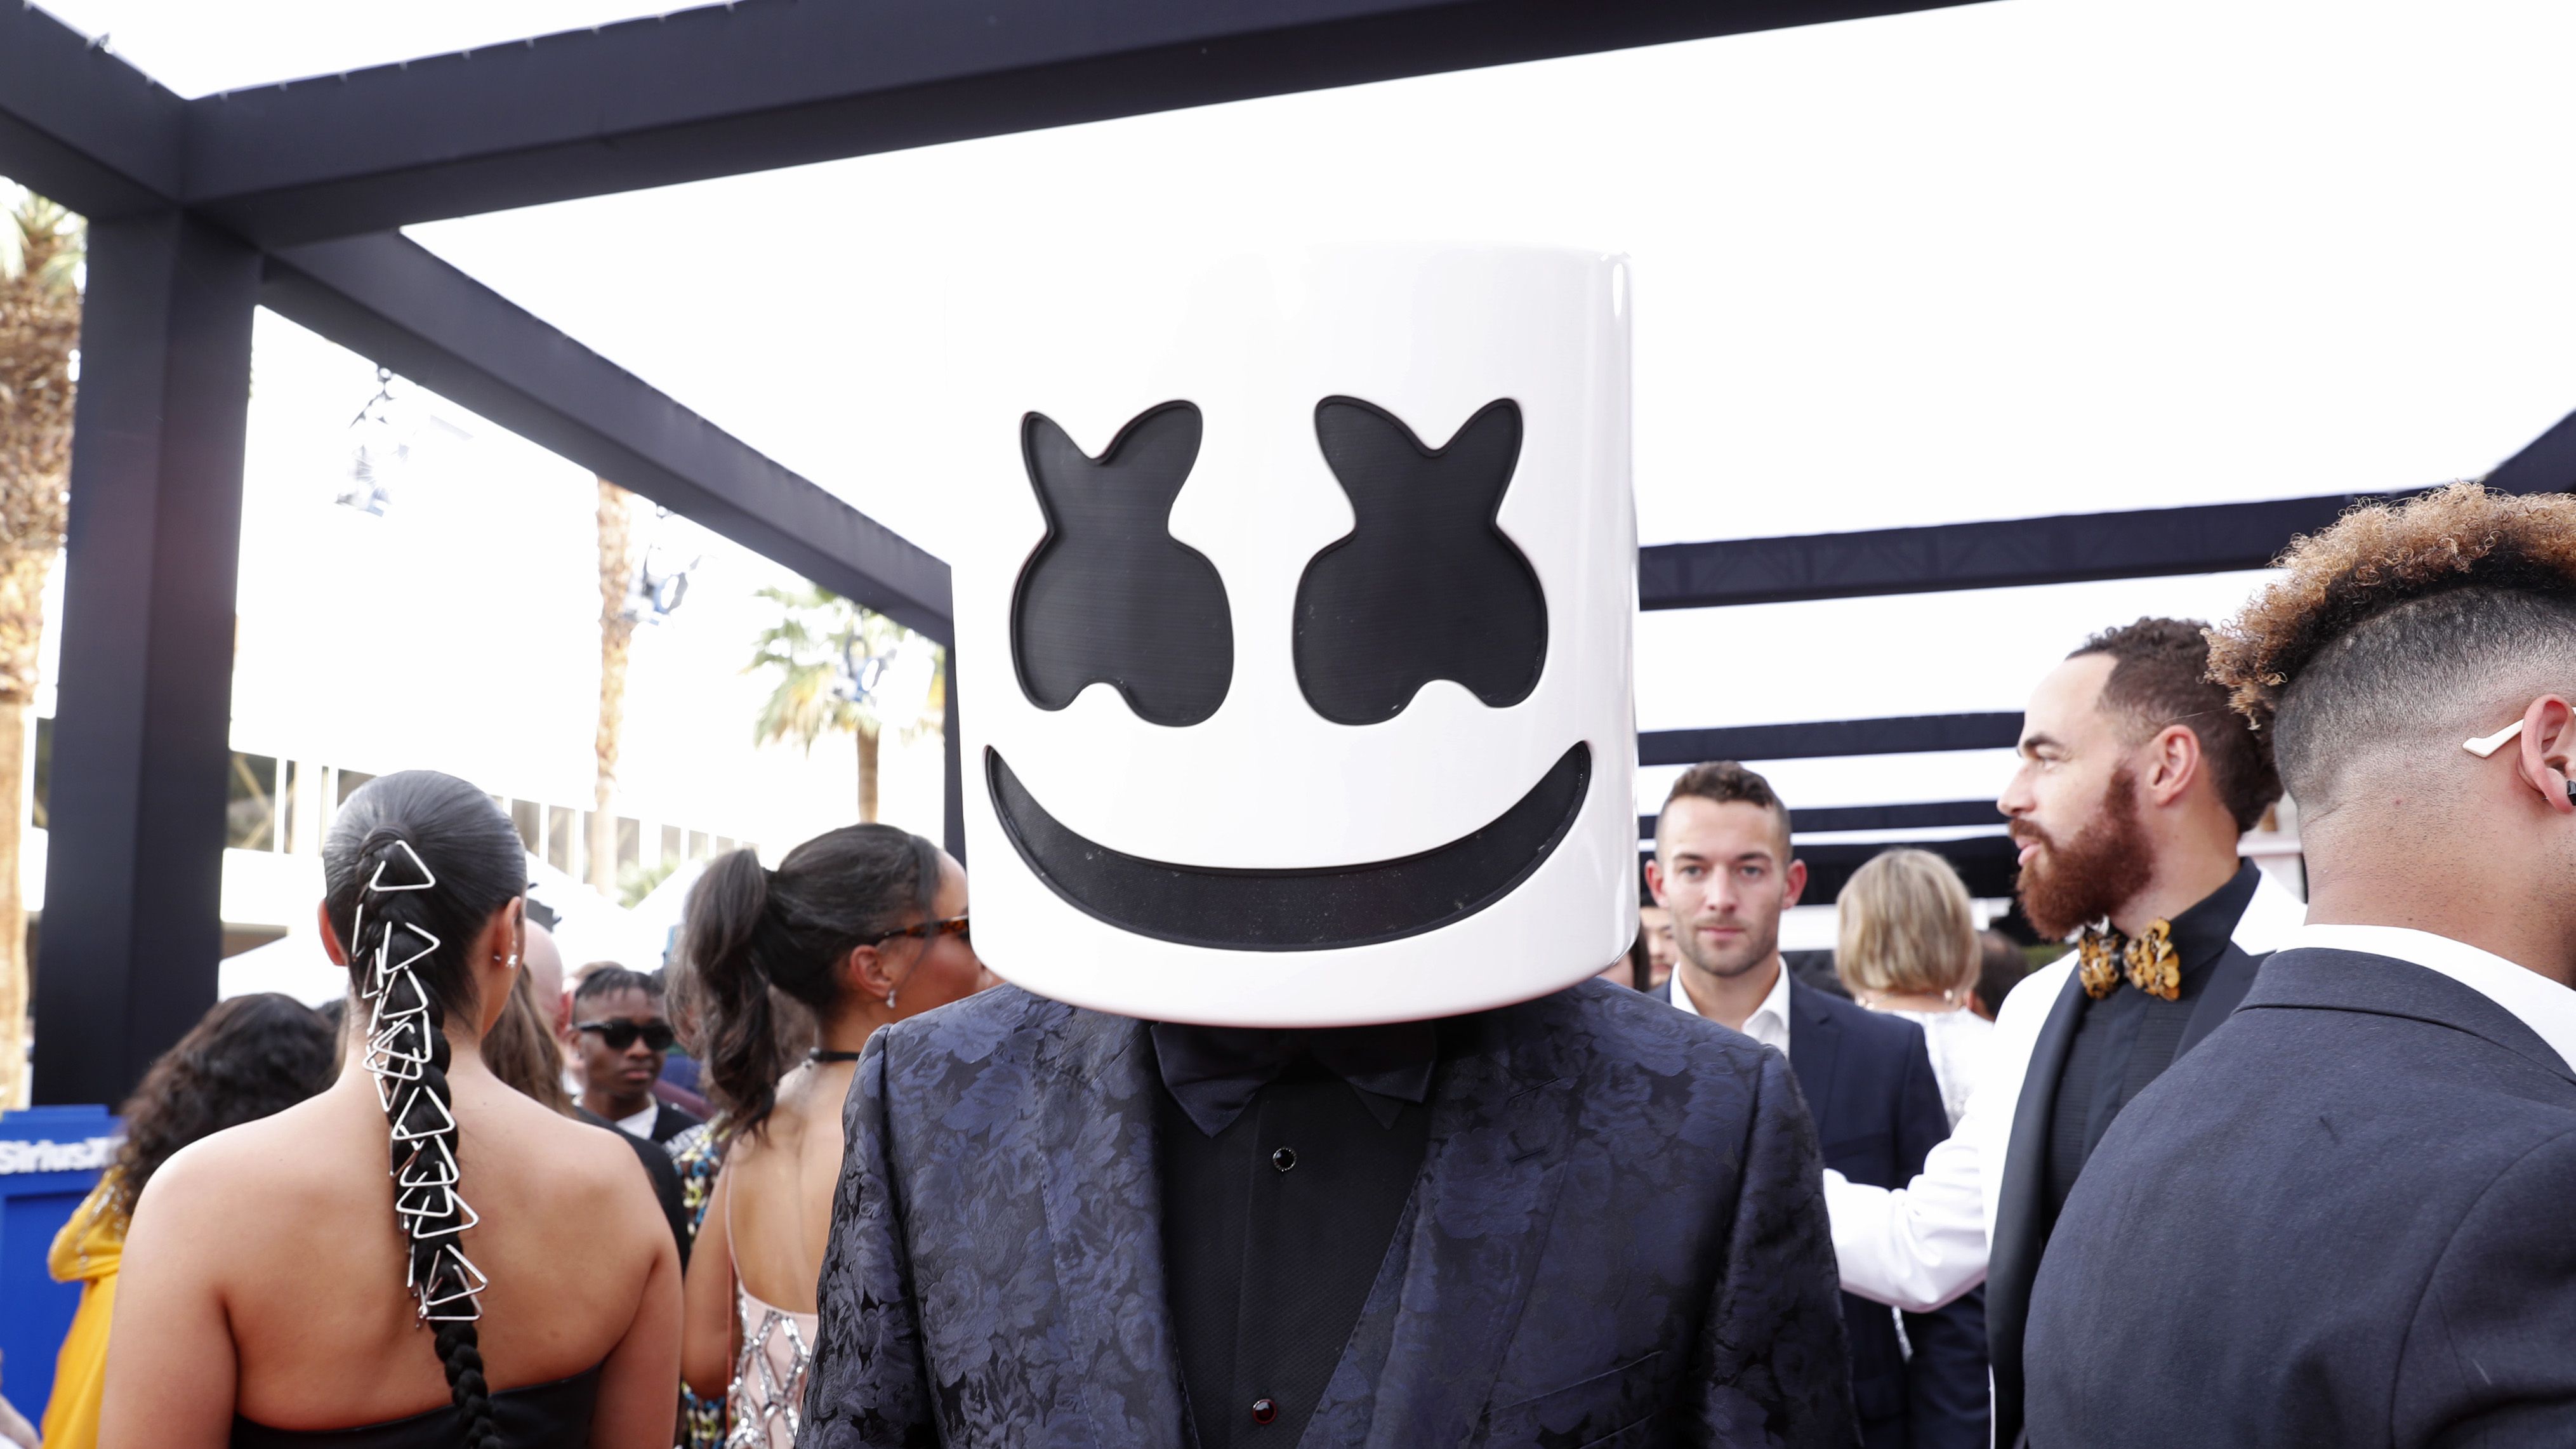 Dj Bravo Sex Video - What Does Marshmello's Face Look Like Under His Mask?